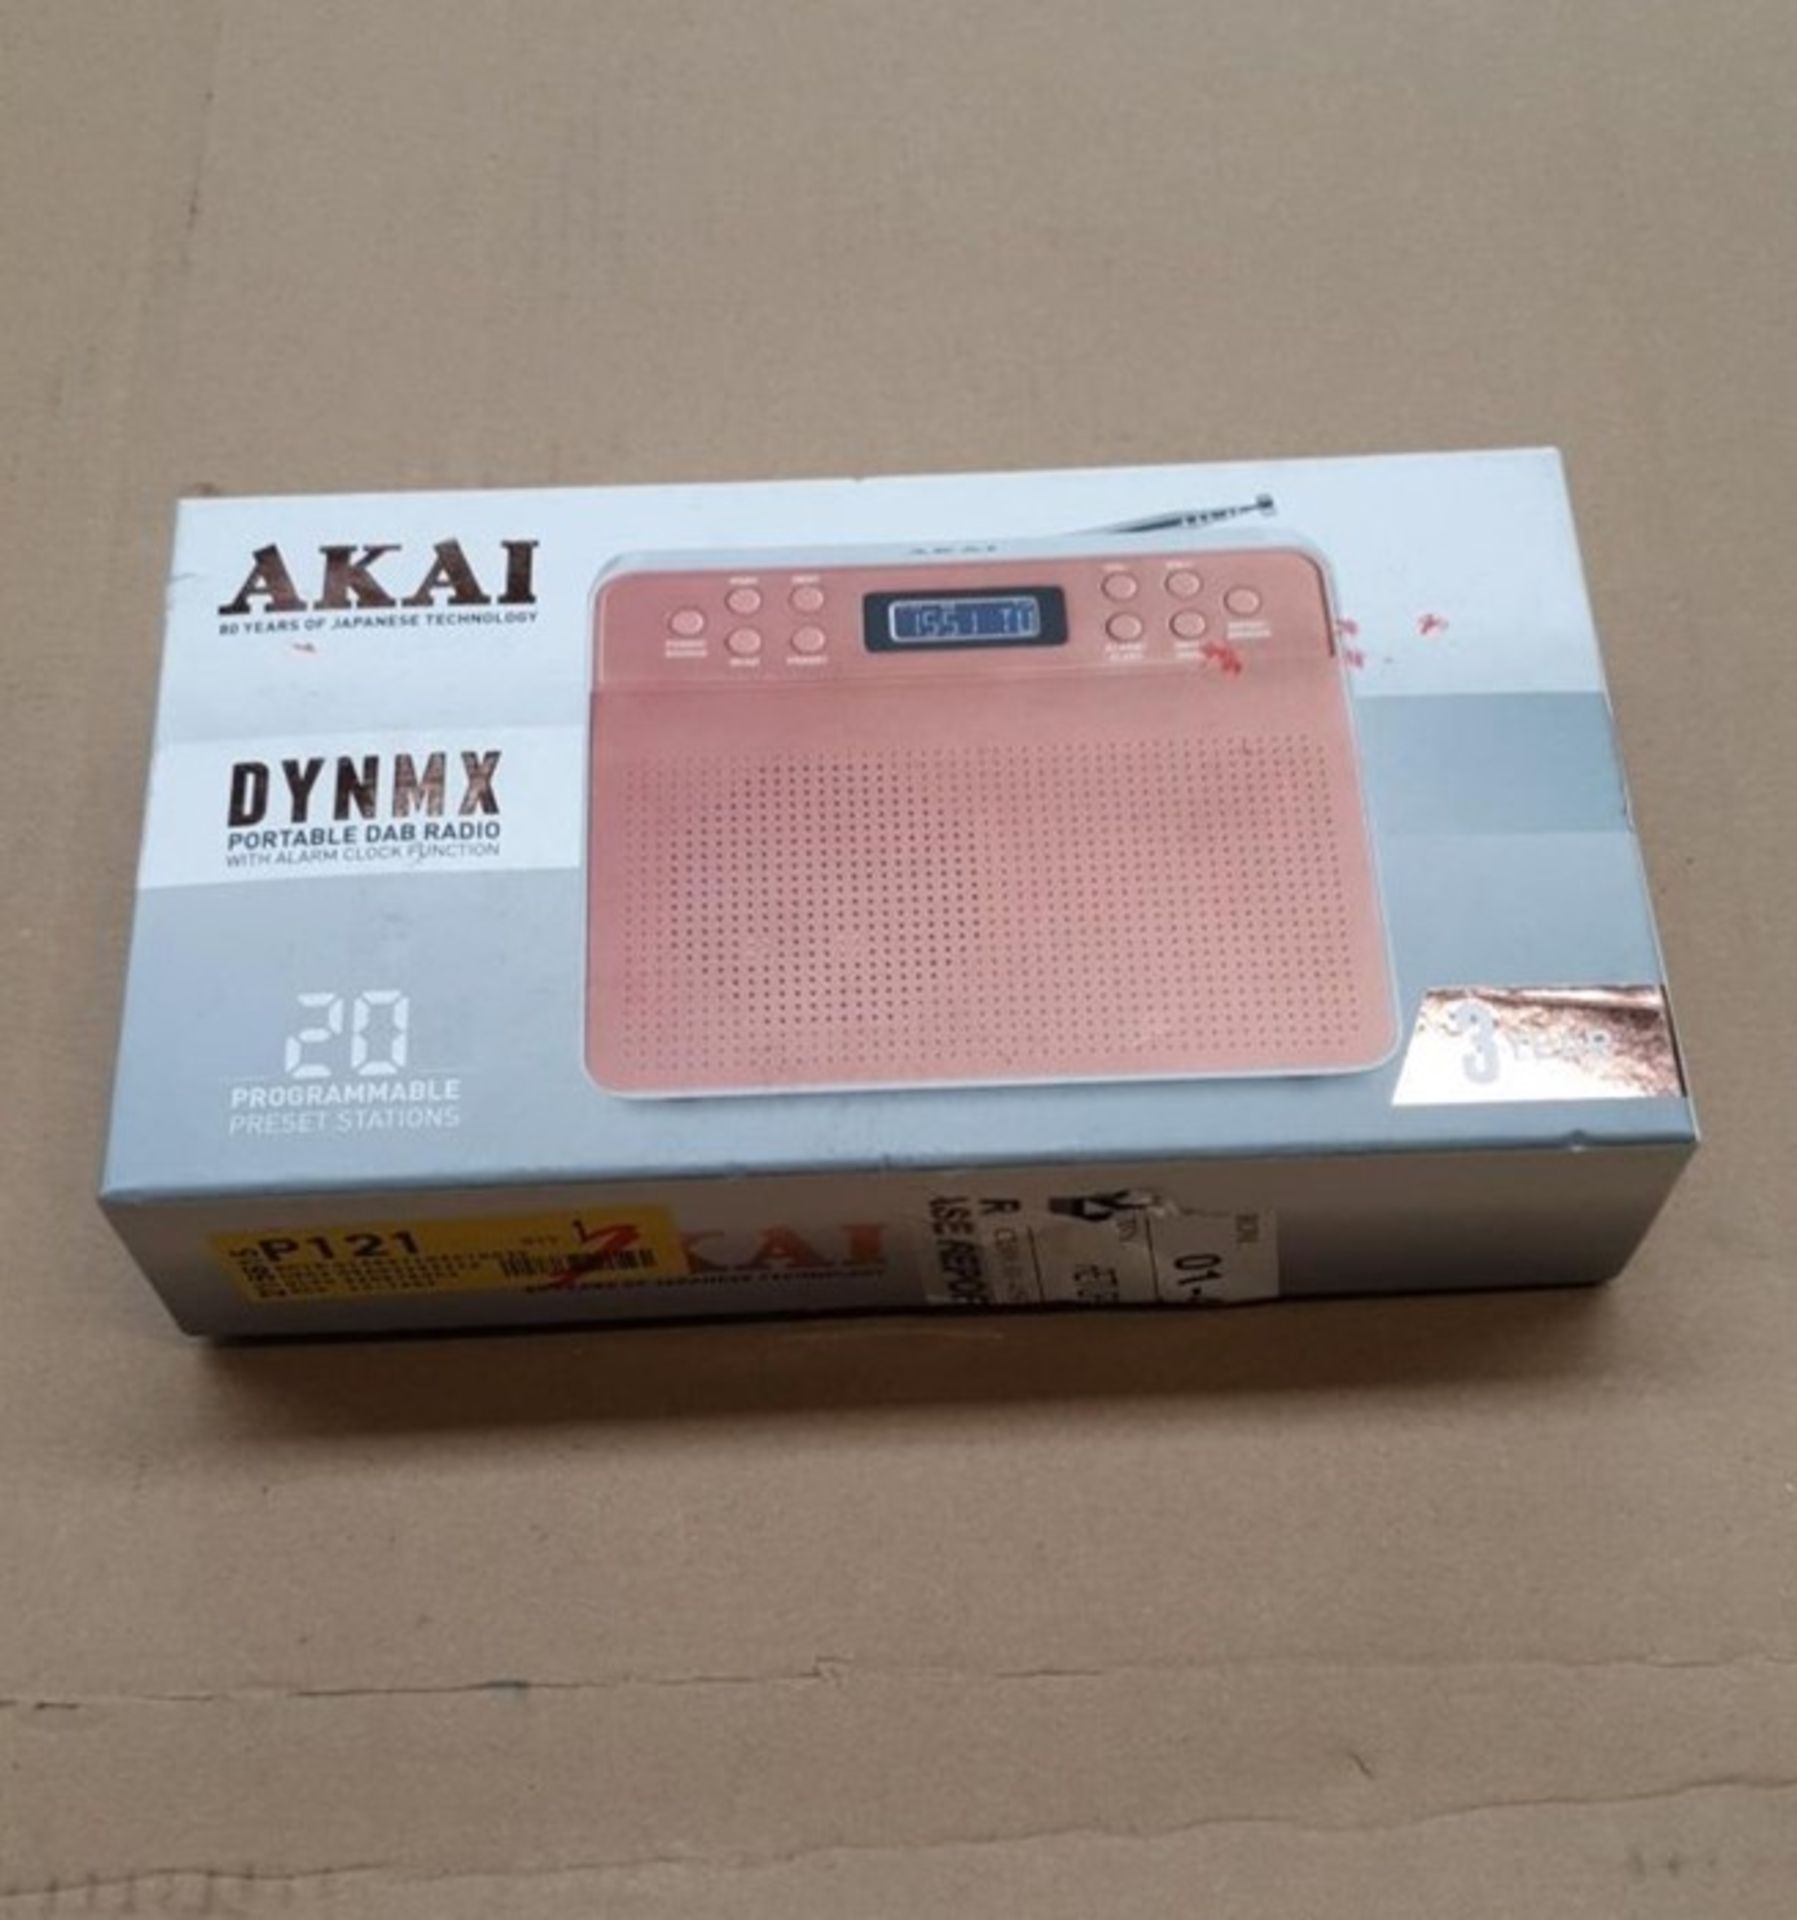 1 BOXED AKAI RETRO PORTABLE DYNMX DAB RADIO IN ROSE GOLD AND WHITE / BL - 5615 / RRP £30.00 (VIEWING